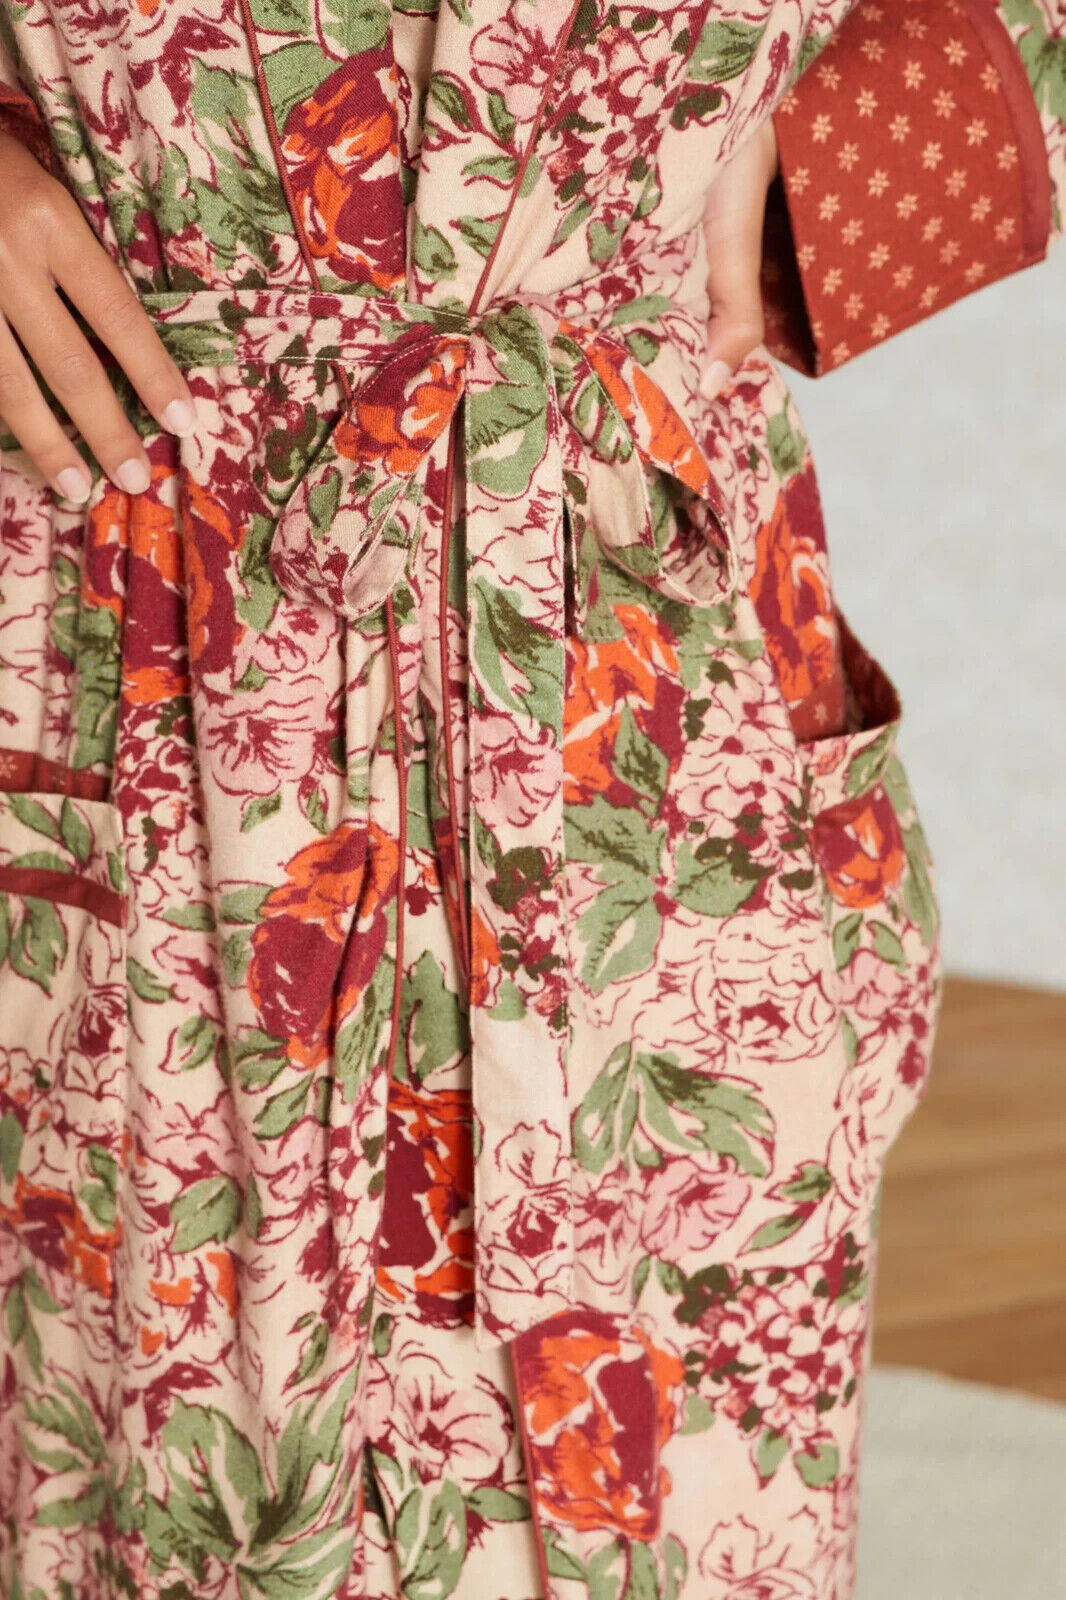 Laura Ashley Floral Printed Coverup Robe Duster Maxi Top